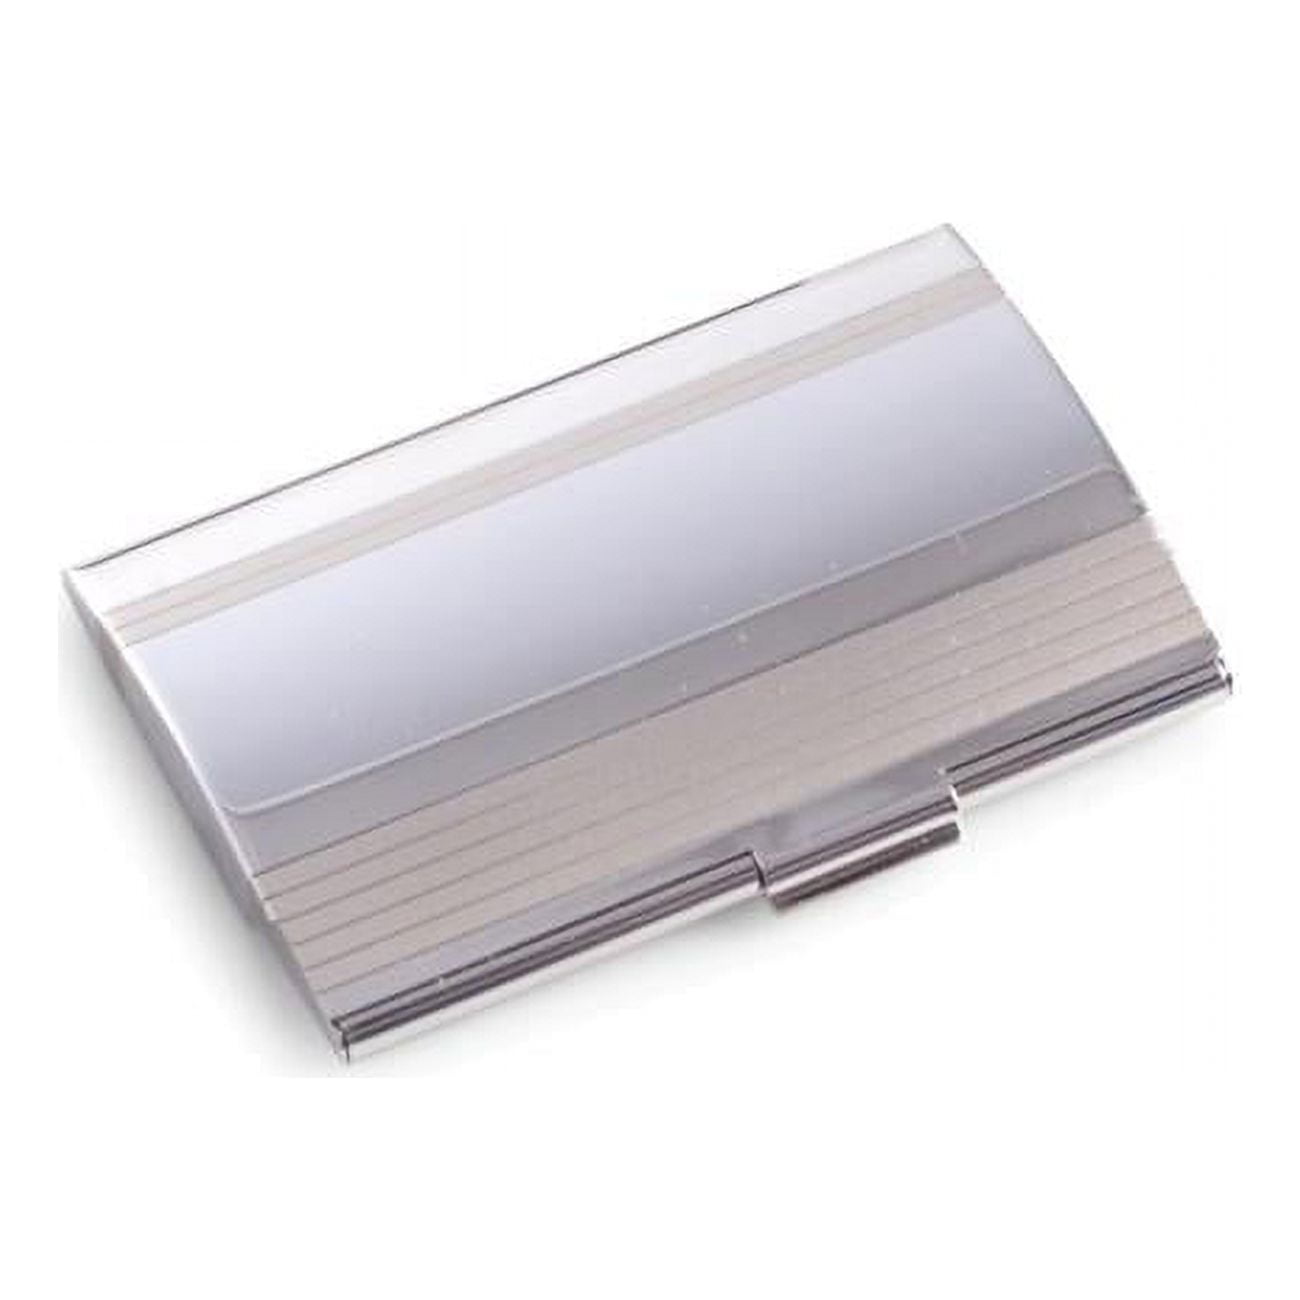 Picture of Bey-Berk International D293S Stainless Steel Business Card Case with Brushed &amp; Shiny Finish - Silver